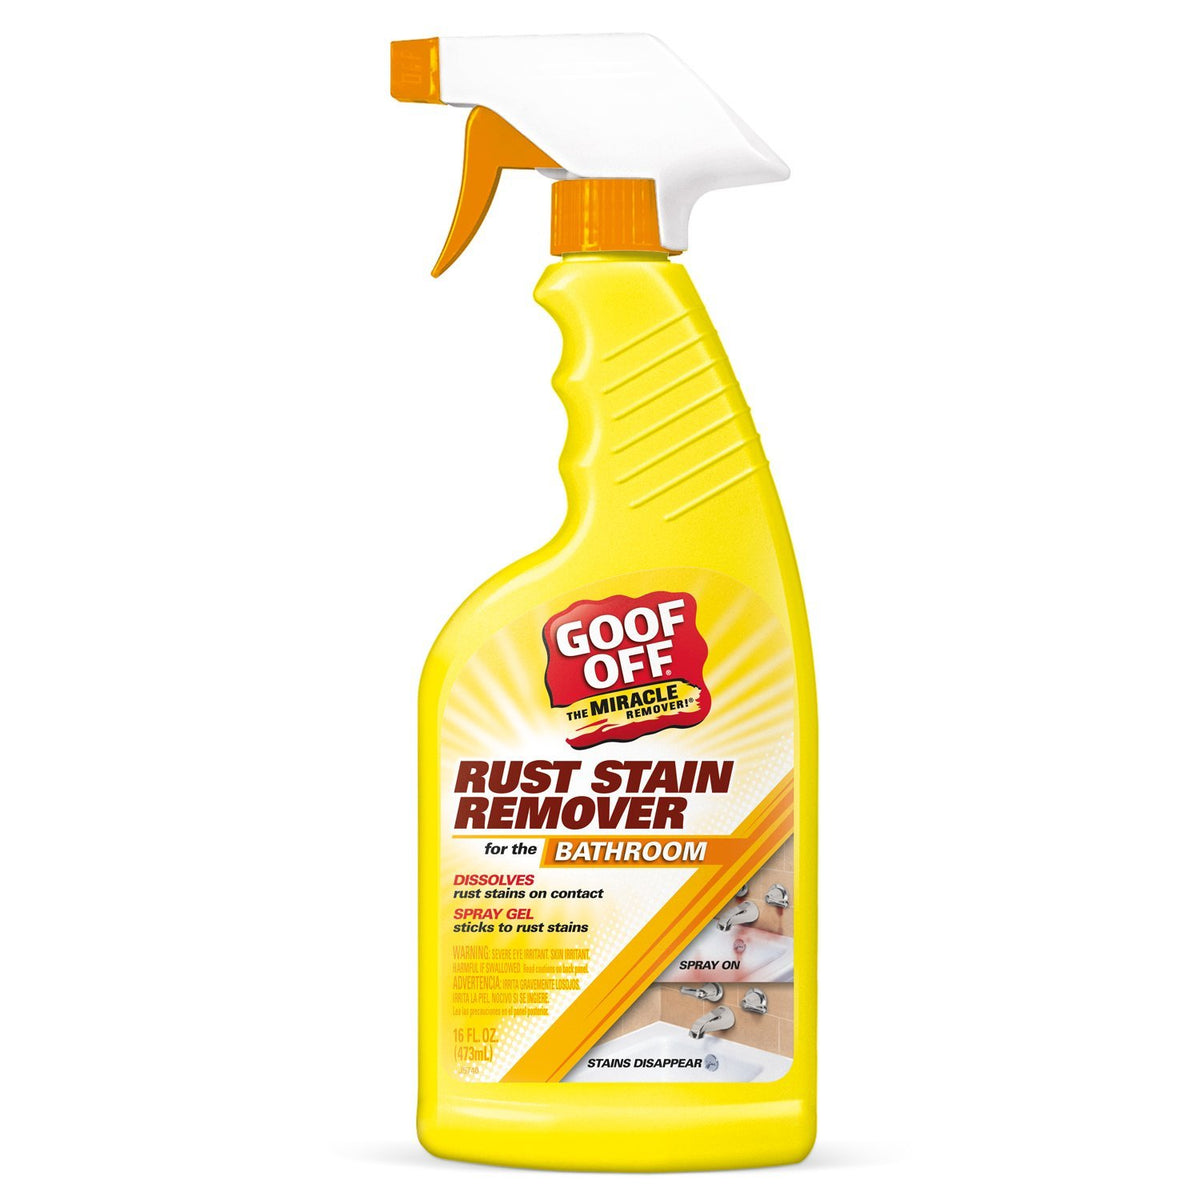 Goof Off PSX20004 Rust Stain Remover, 16 Oz